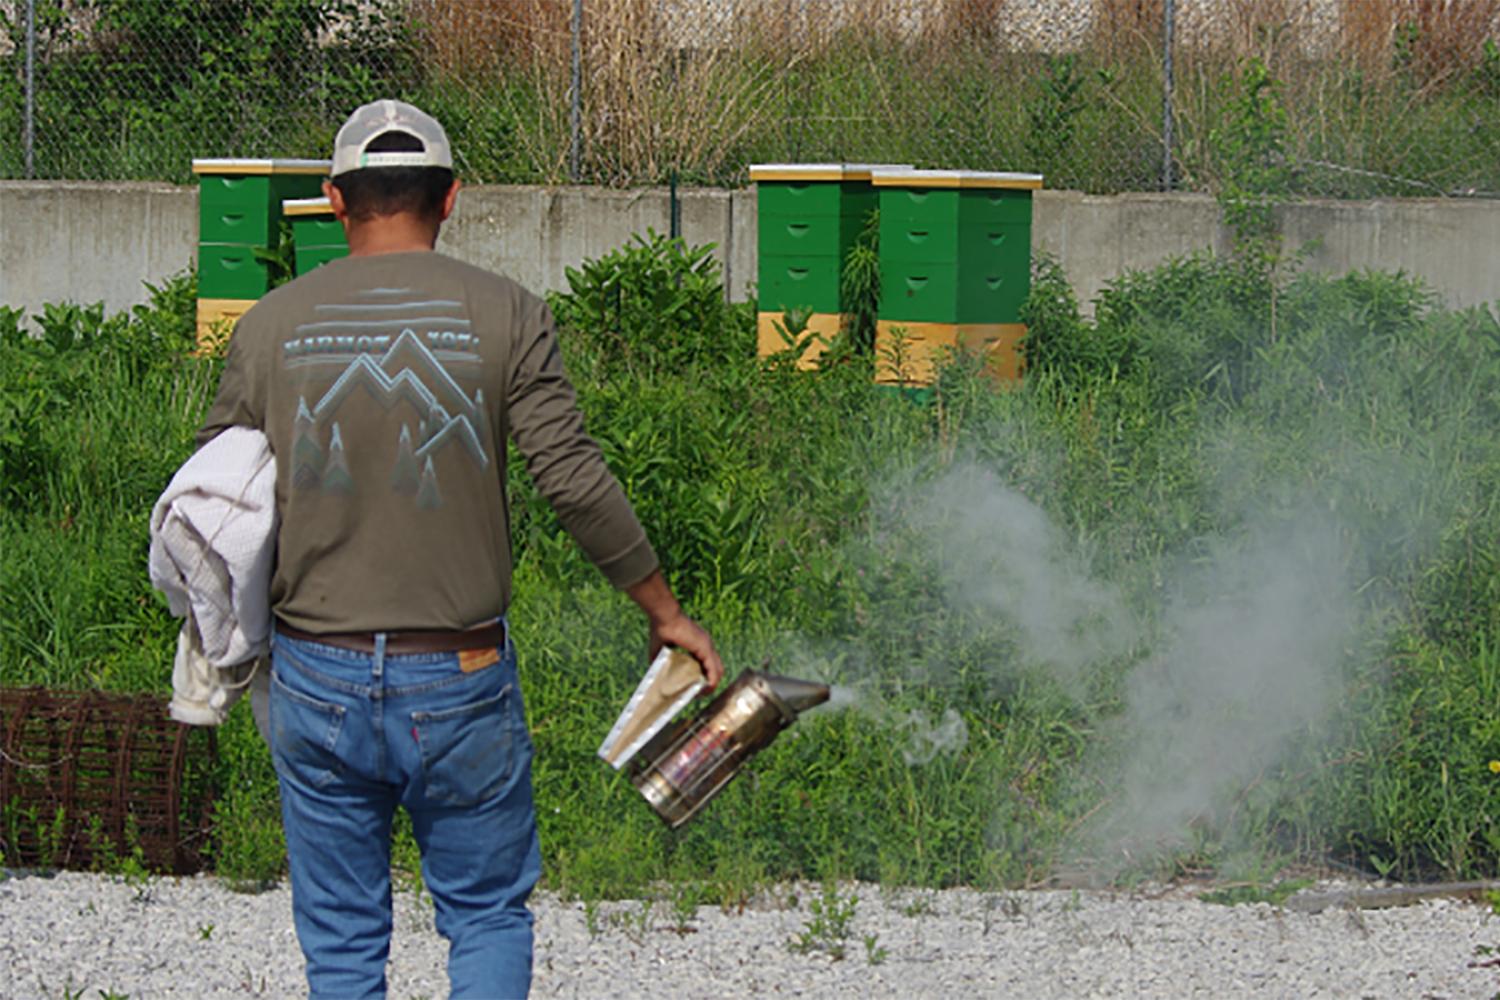 Back view of a man with a smoker in his hand approaching urban beehives